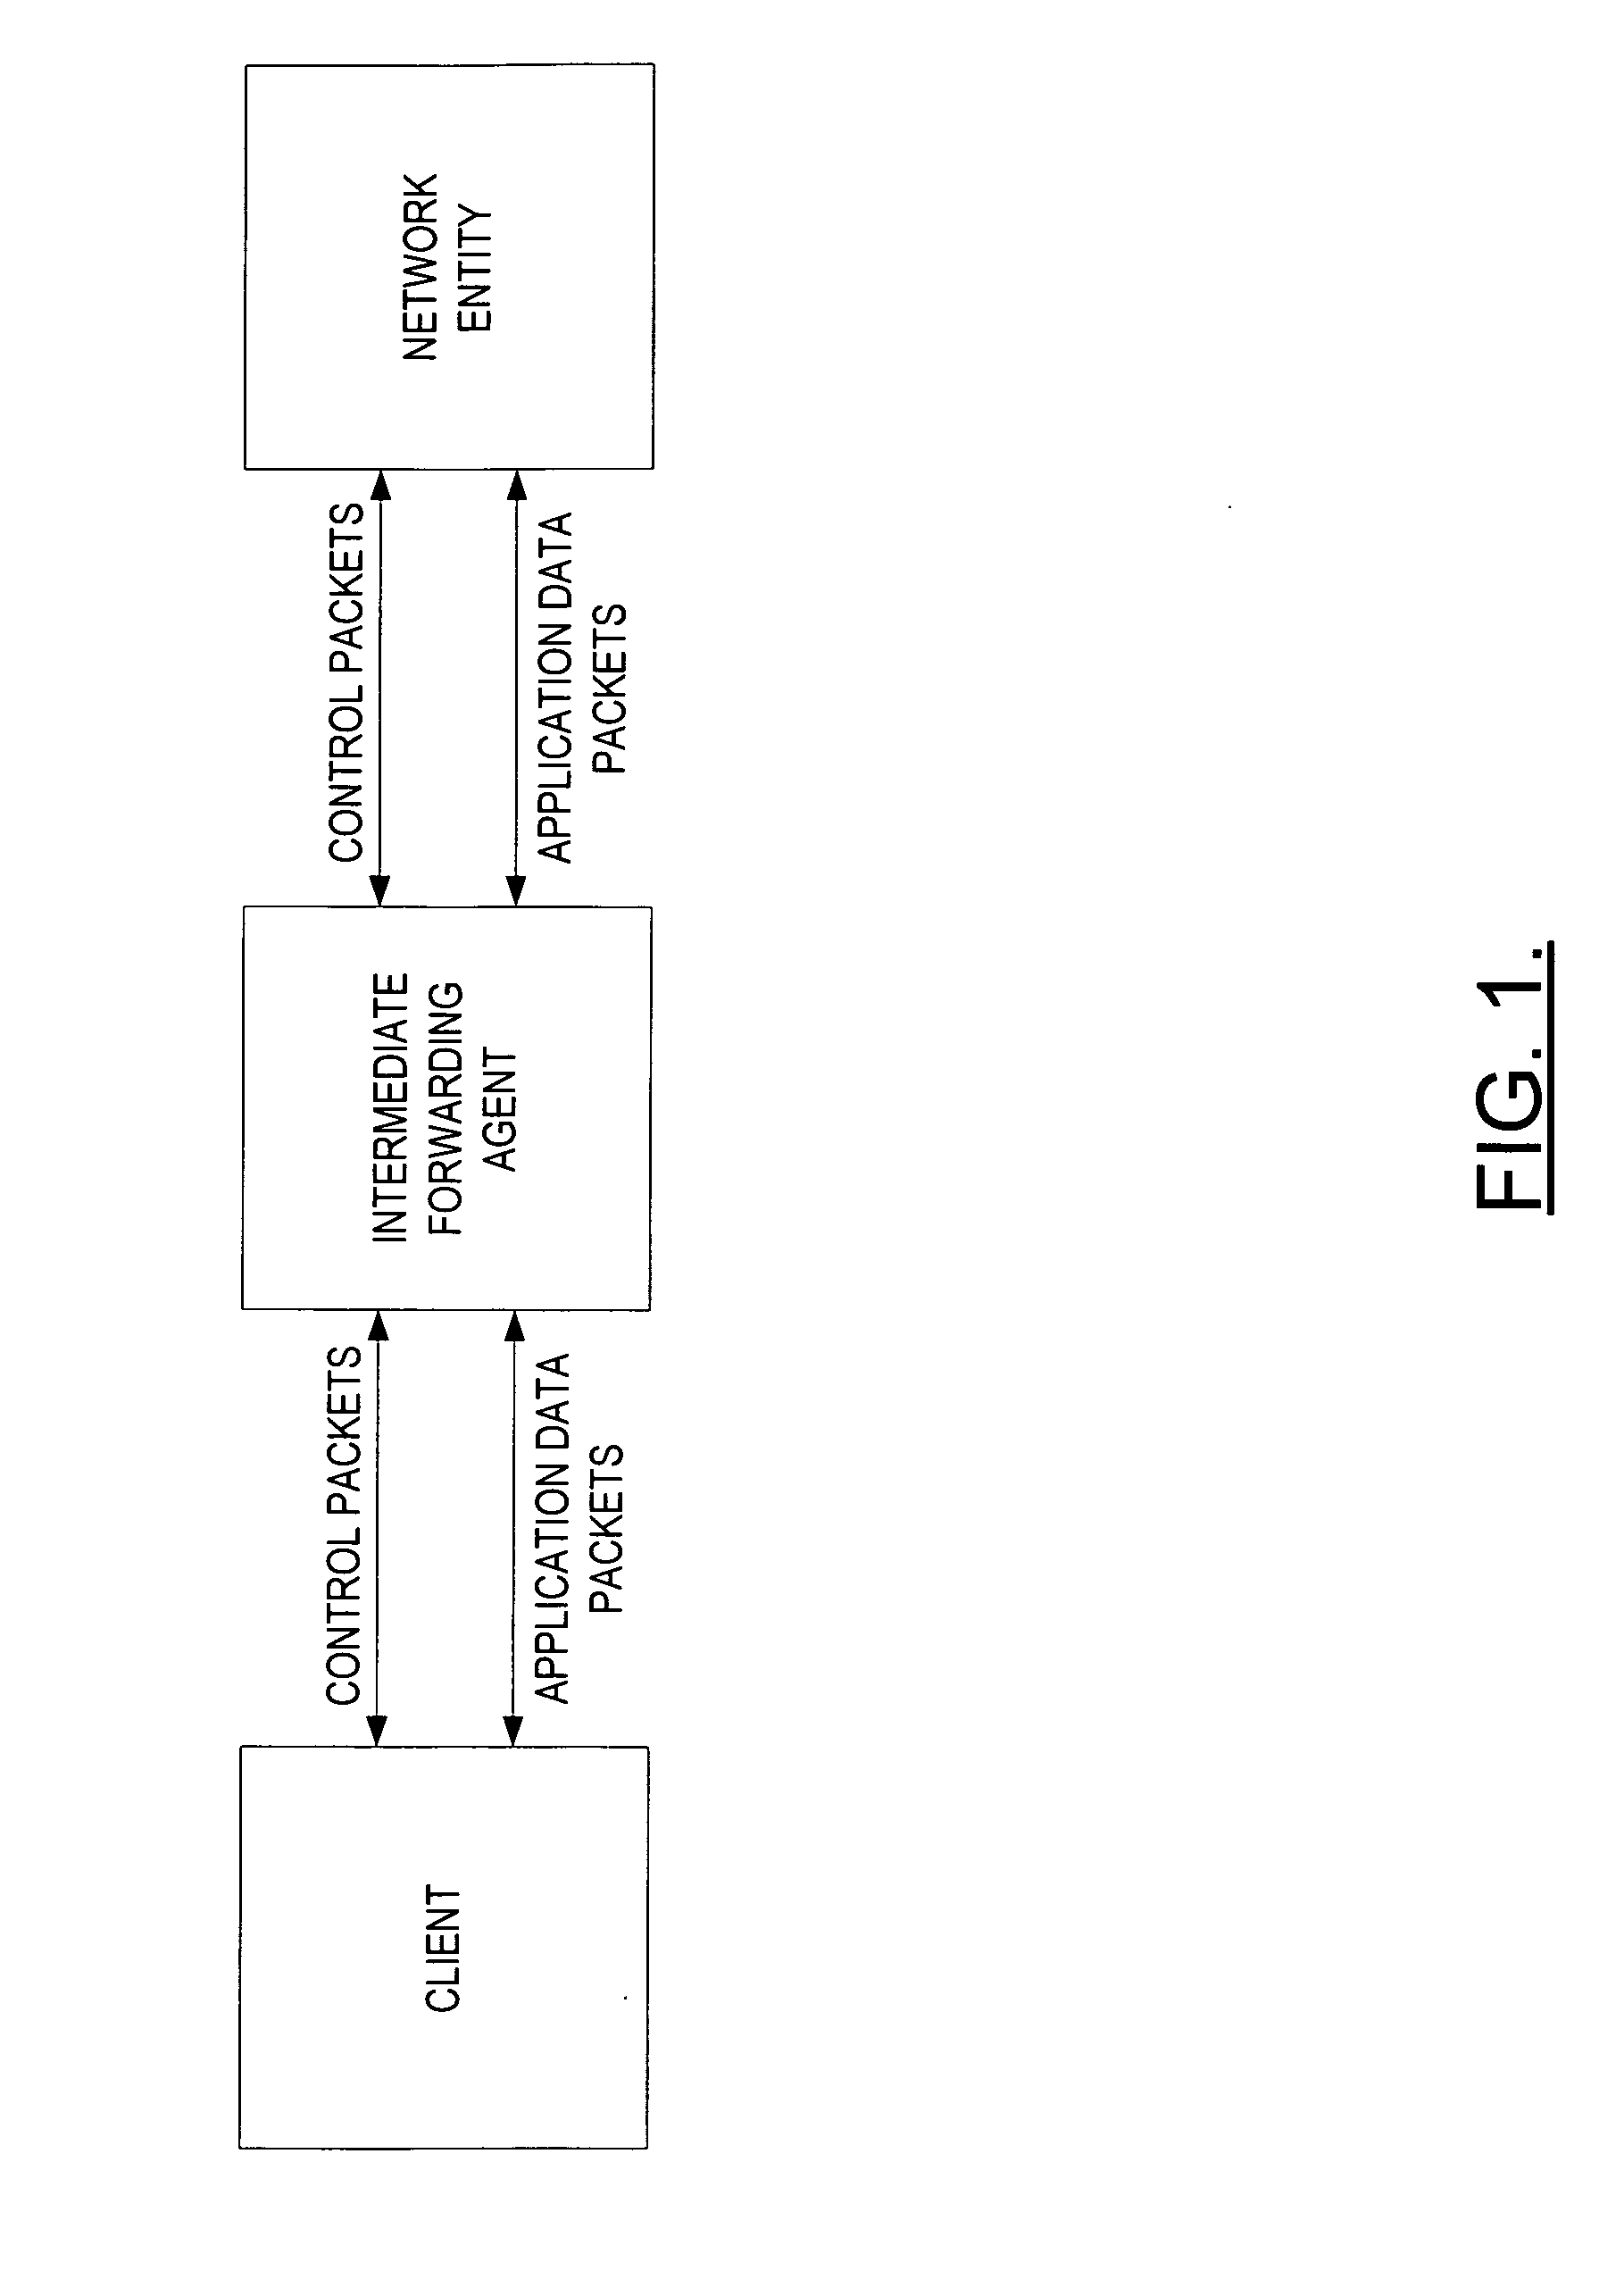 Prioritized control packet delivery for transmission control protocol (TCP)